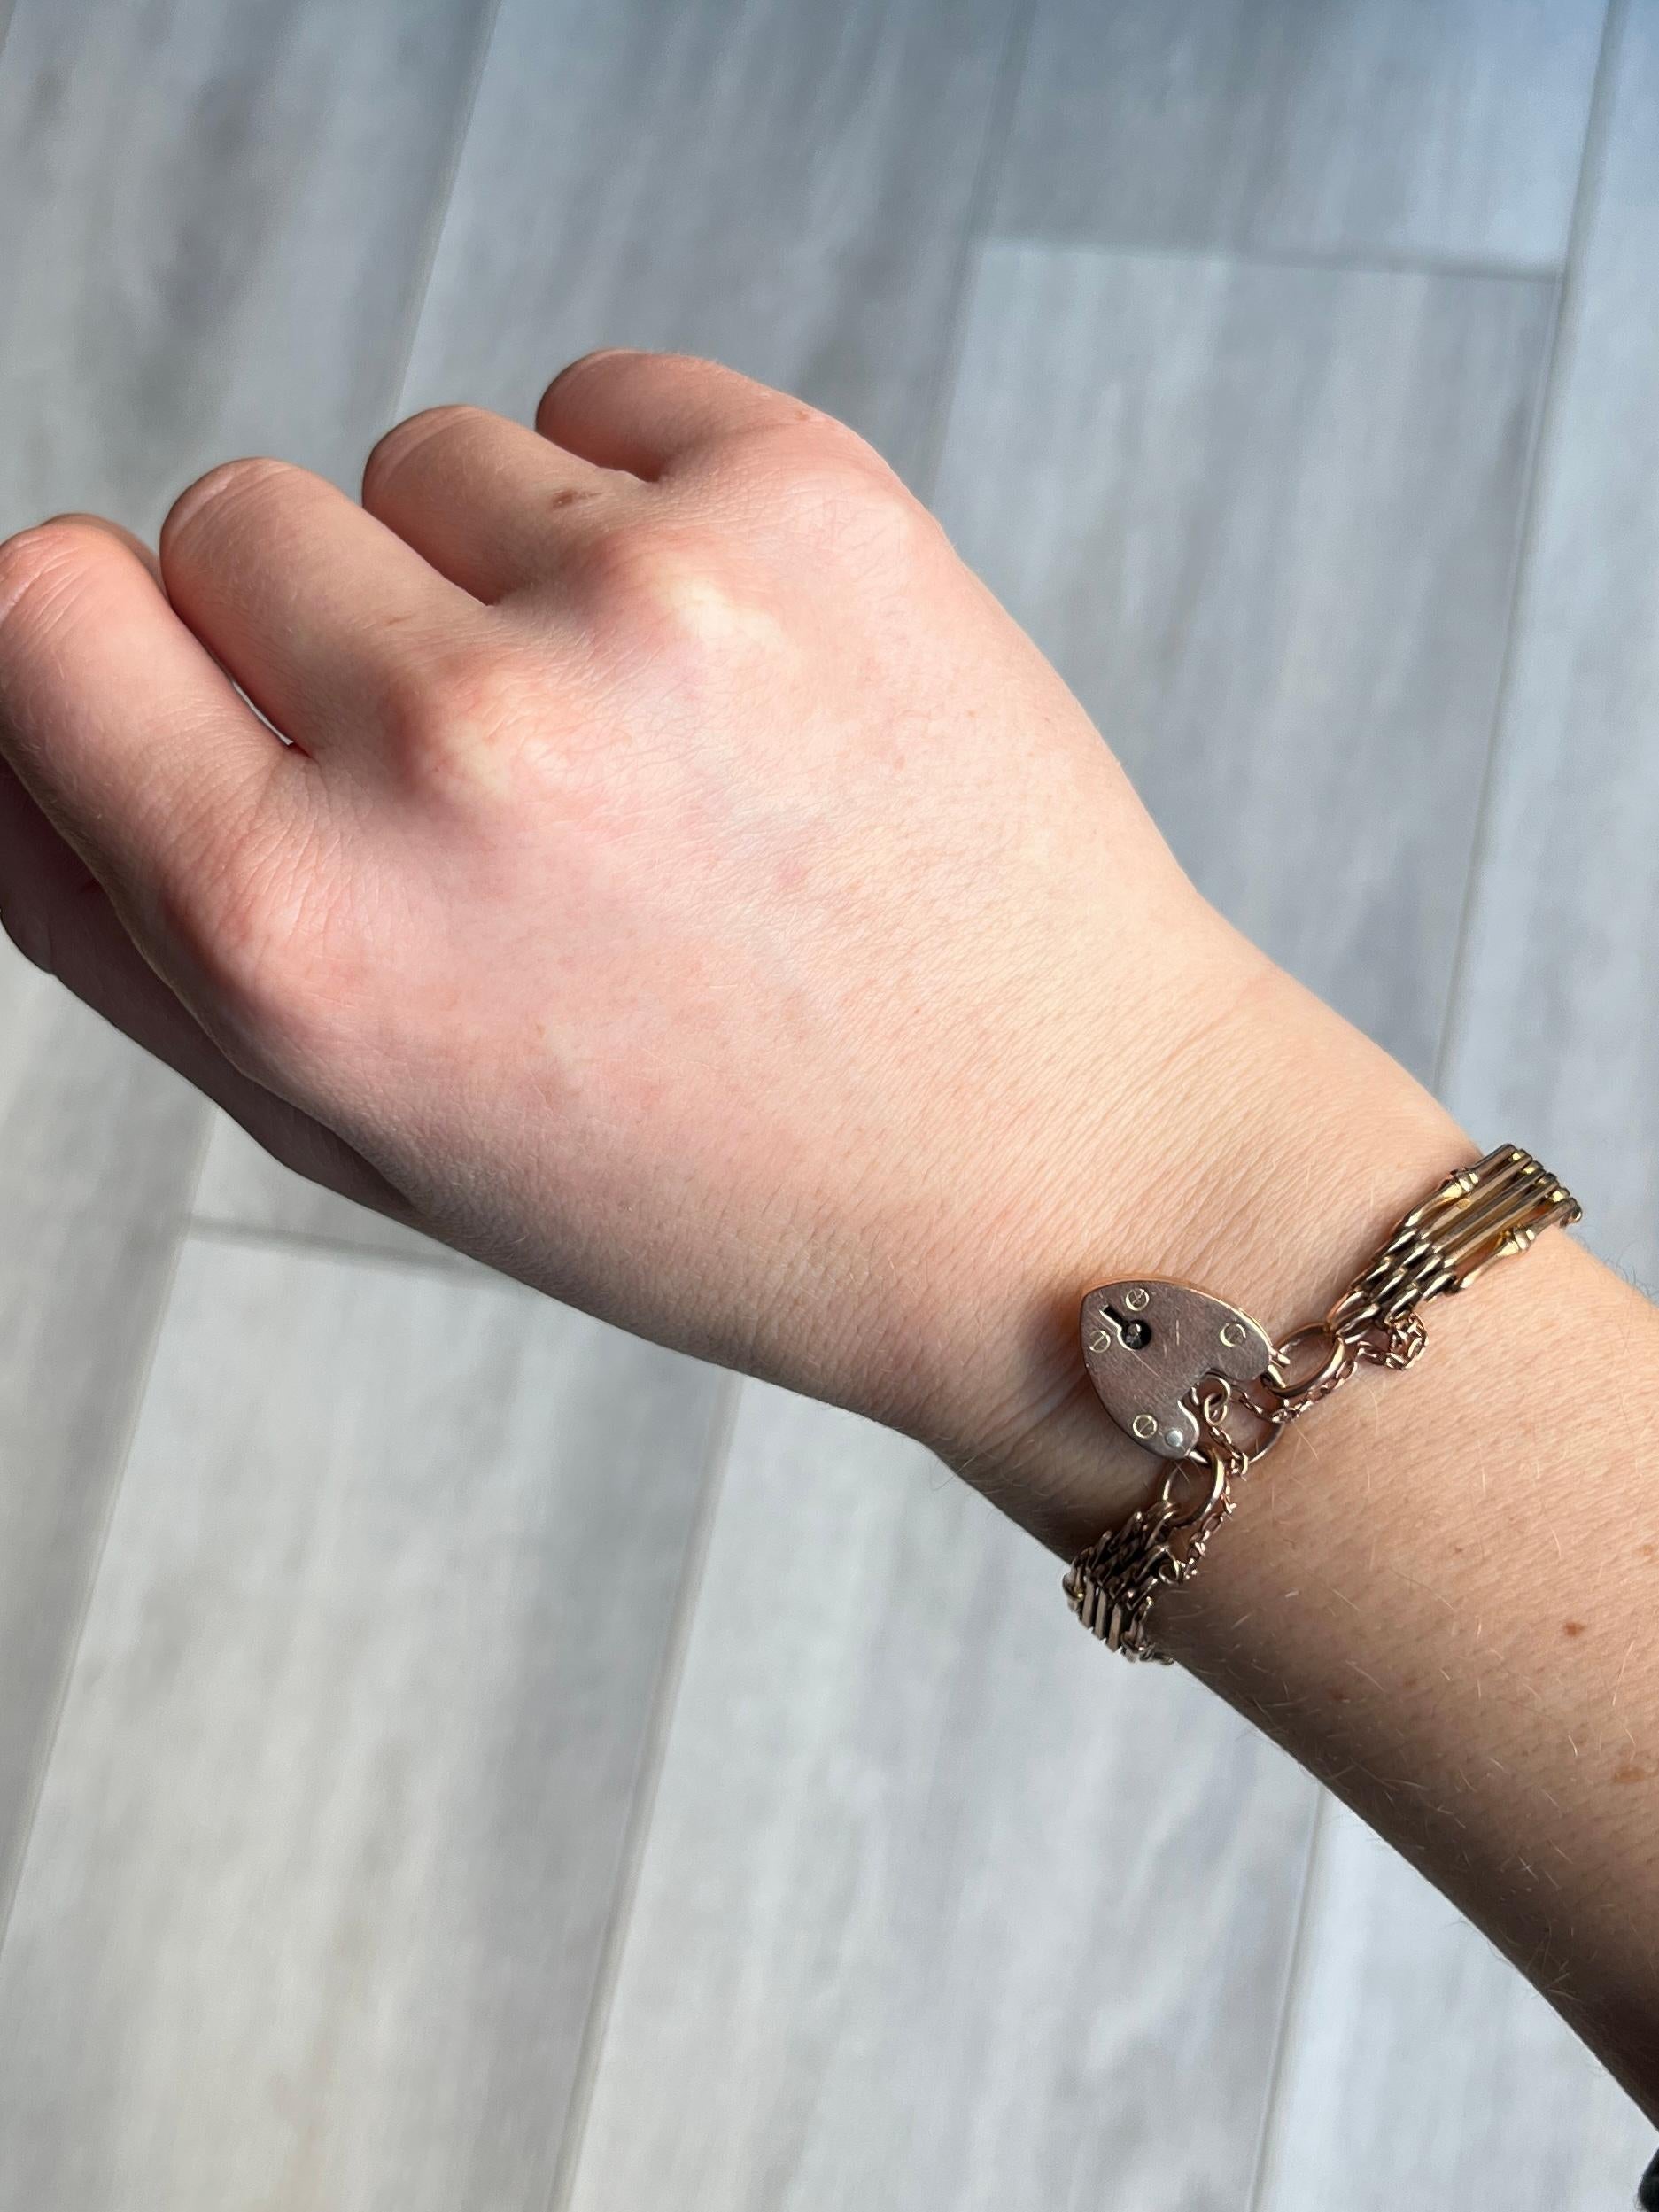 This bracelet is modelled in hollow 9ct soft tone rose gold, which makes the bracelet light weight and comfortable to wear. 

Length: 19mm
Width: 8mm

Weight: 17.8g

